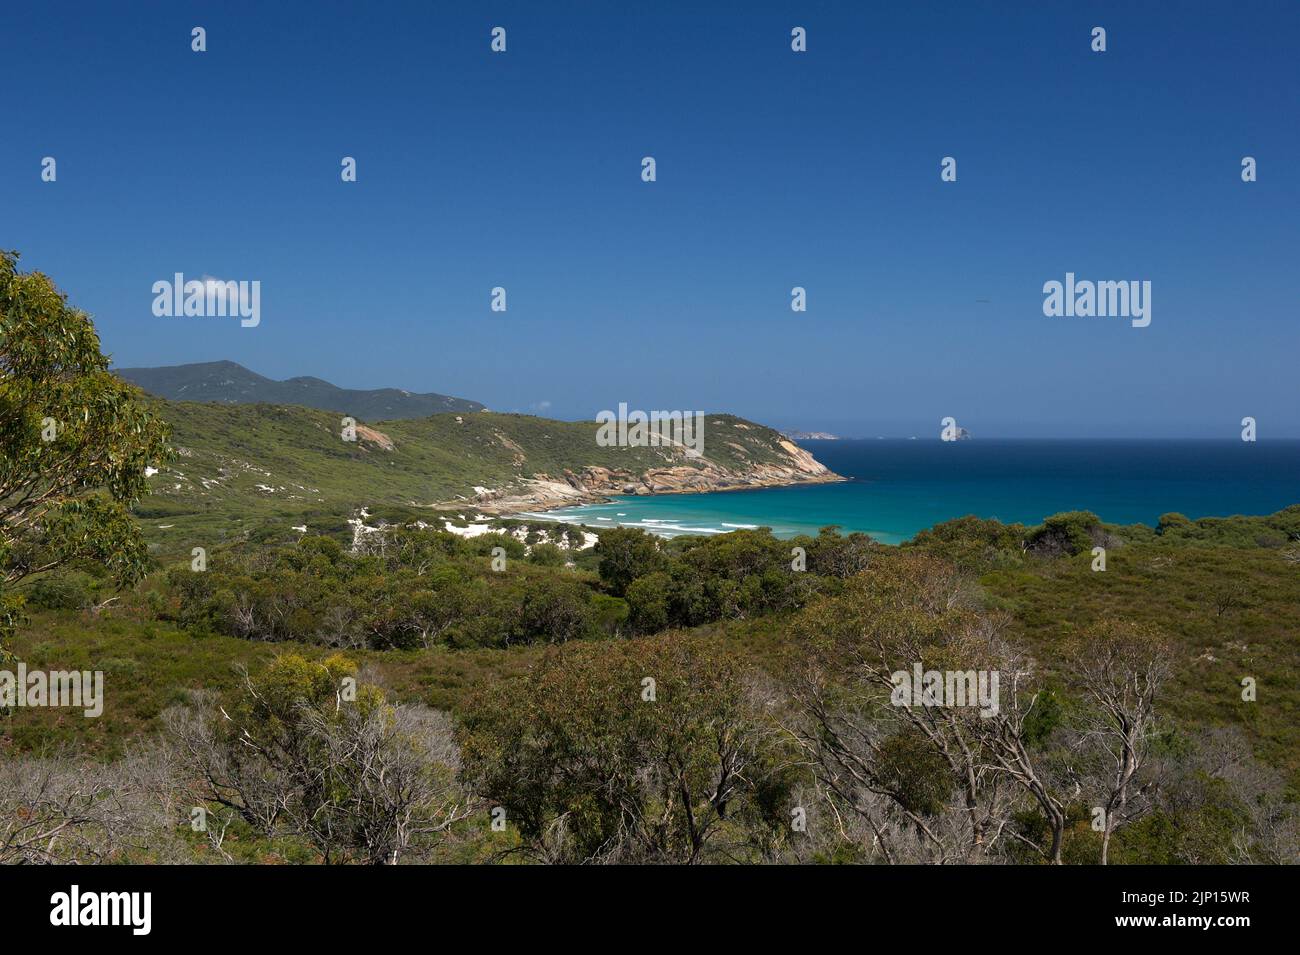 Wilsons Promontory National Park is the most Southerly point of the Australian mainland. It gets the rough seas of Bass Strait, but not today! Stock Photo